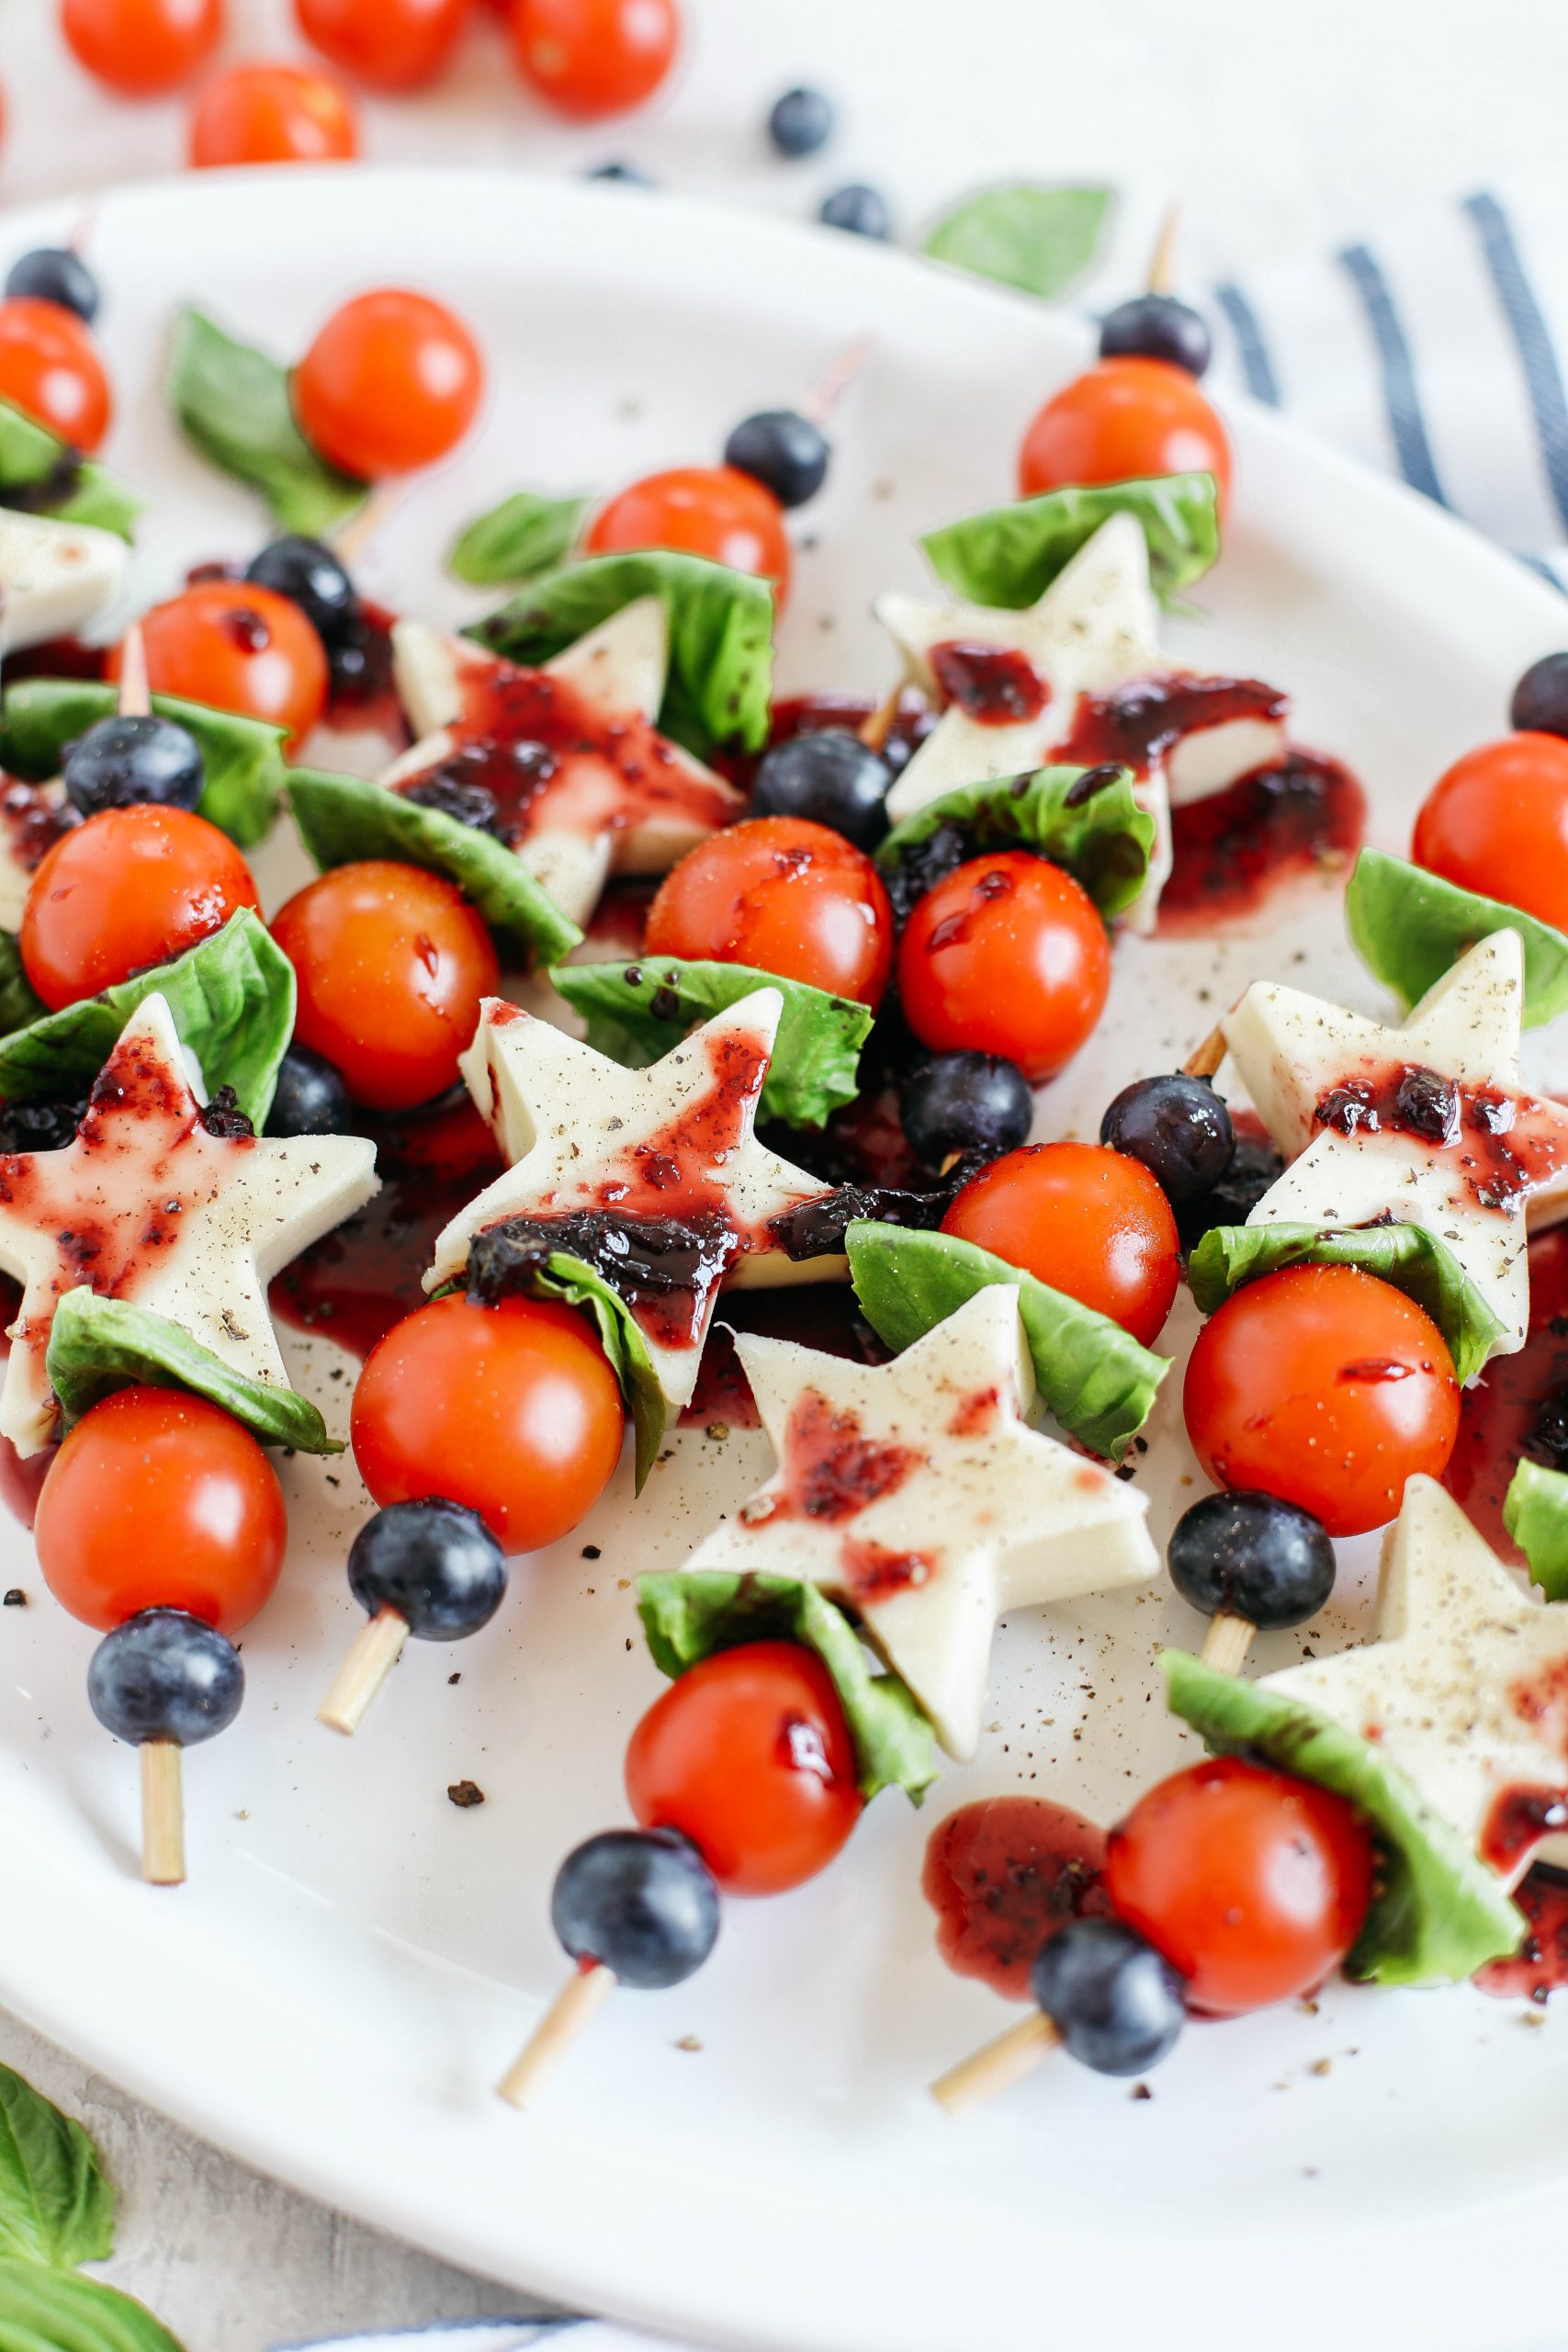 These Caprese Skewers with Blueberry Balsamic Glaze are healthy, incredibly delicious and make the perfect festive appetizer for Memorial Day, 4th of July or Labor Day weekend!